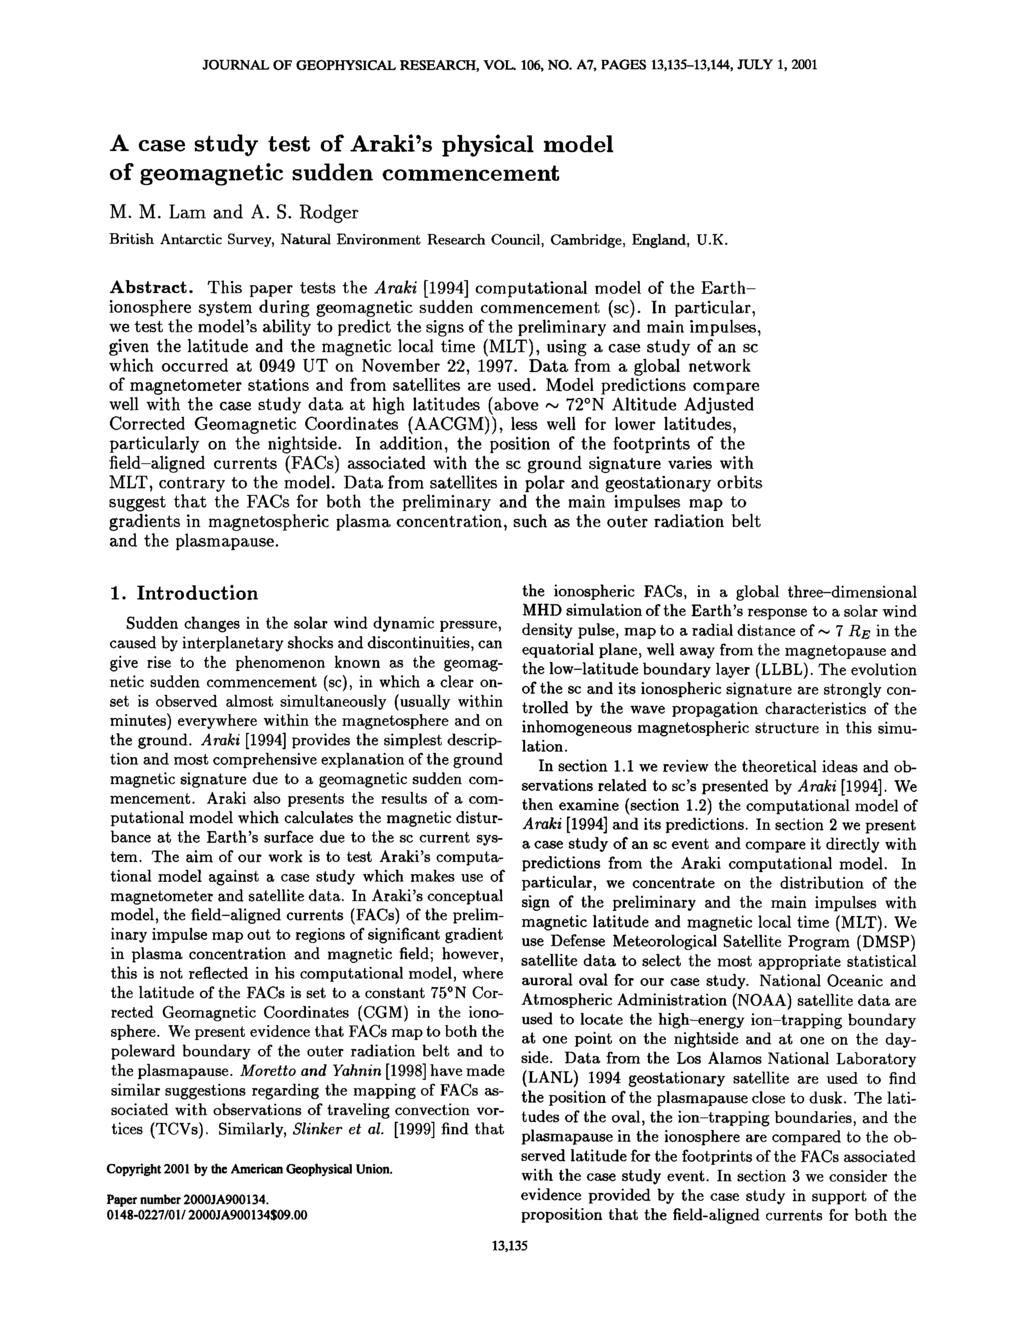 JOURNAL OF GEOPHYSICAL RESEARCH, VOL. 106, NO. A7, PAGES 13,135-13,144, JULY 1, 2001 A case study test of Arakis physical model of geomagnetic sudden commencement M. M. Lam and A. S.